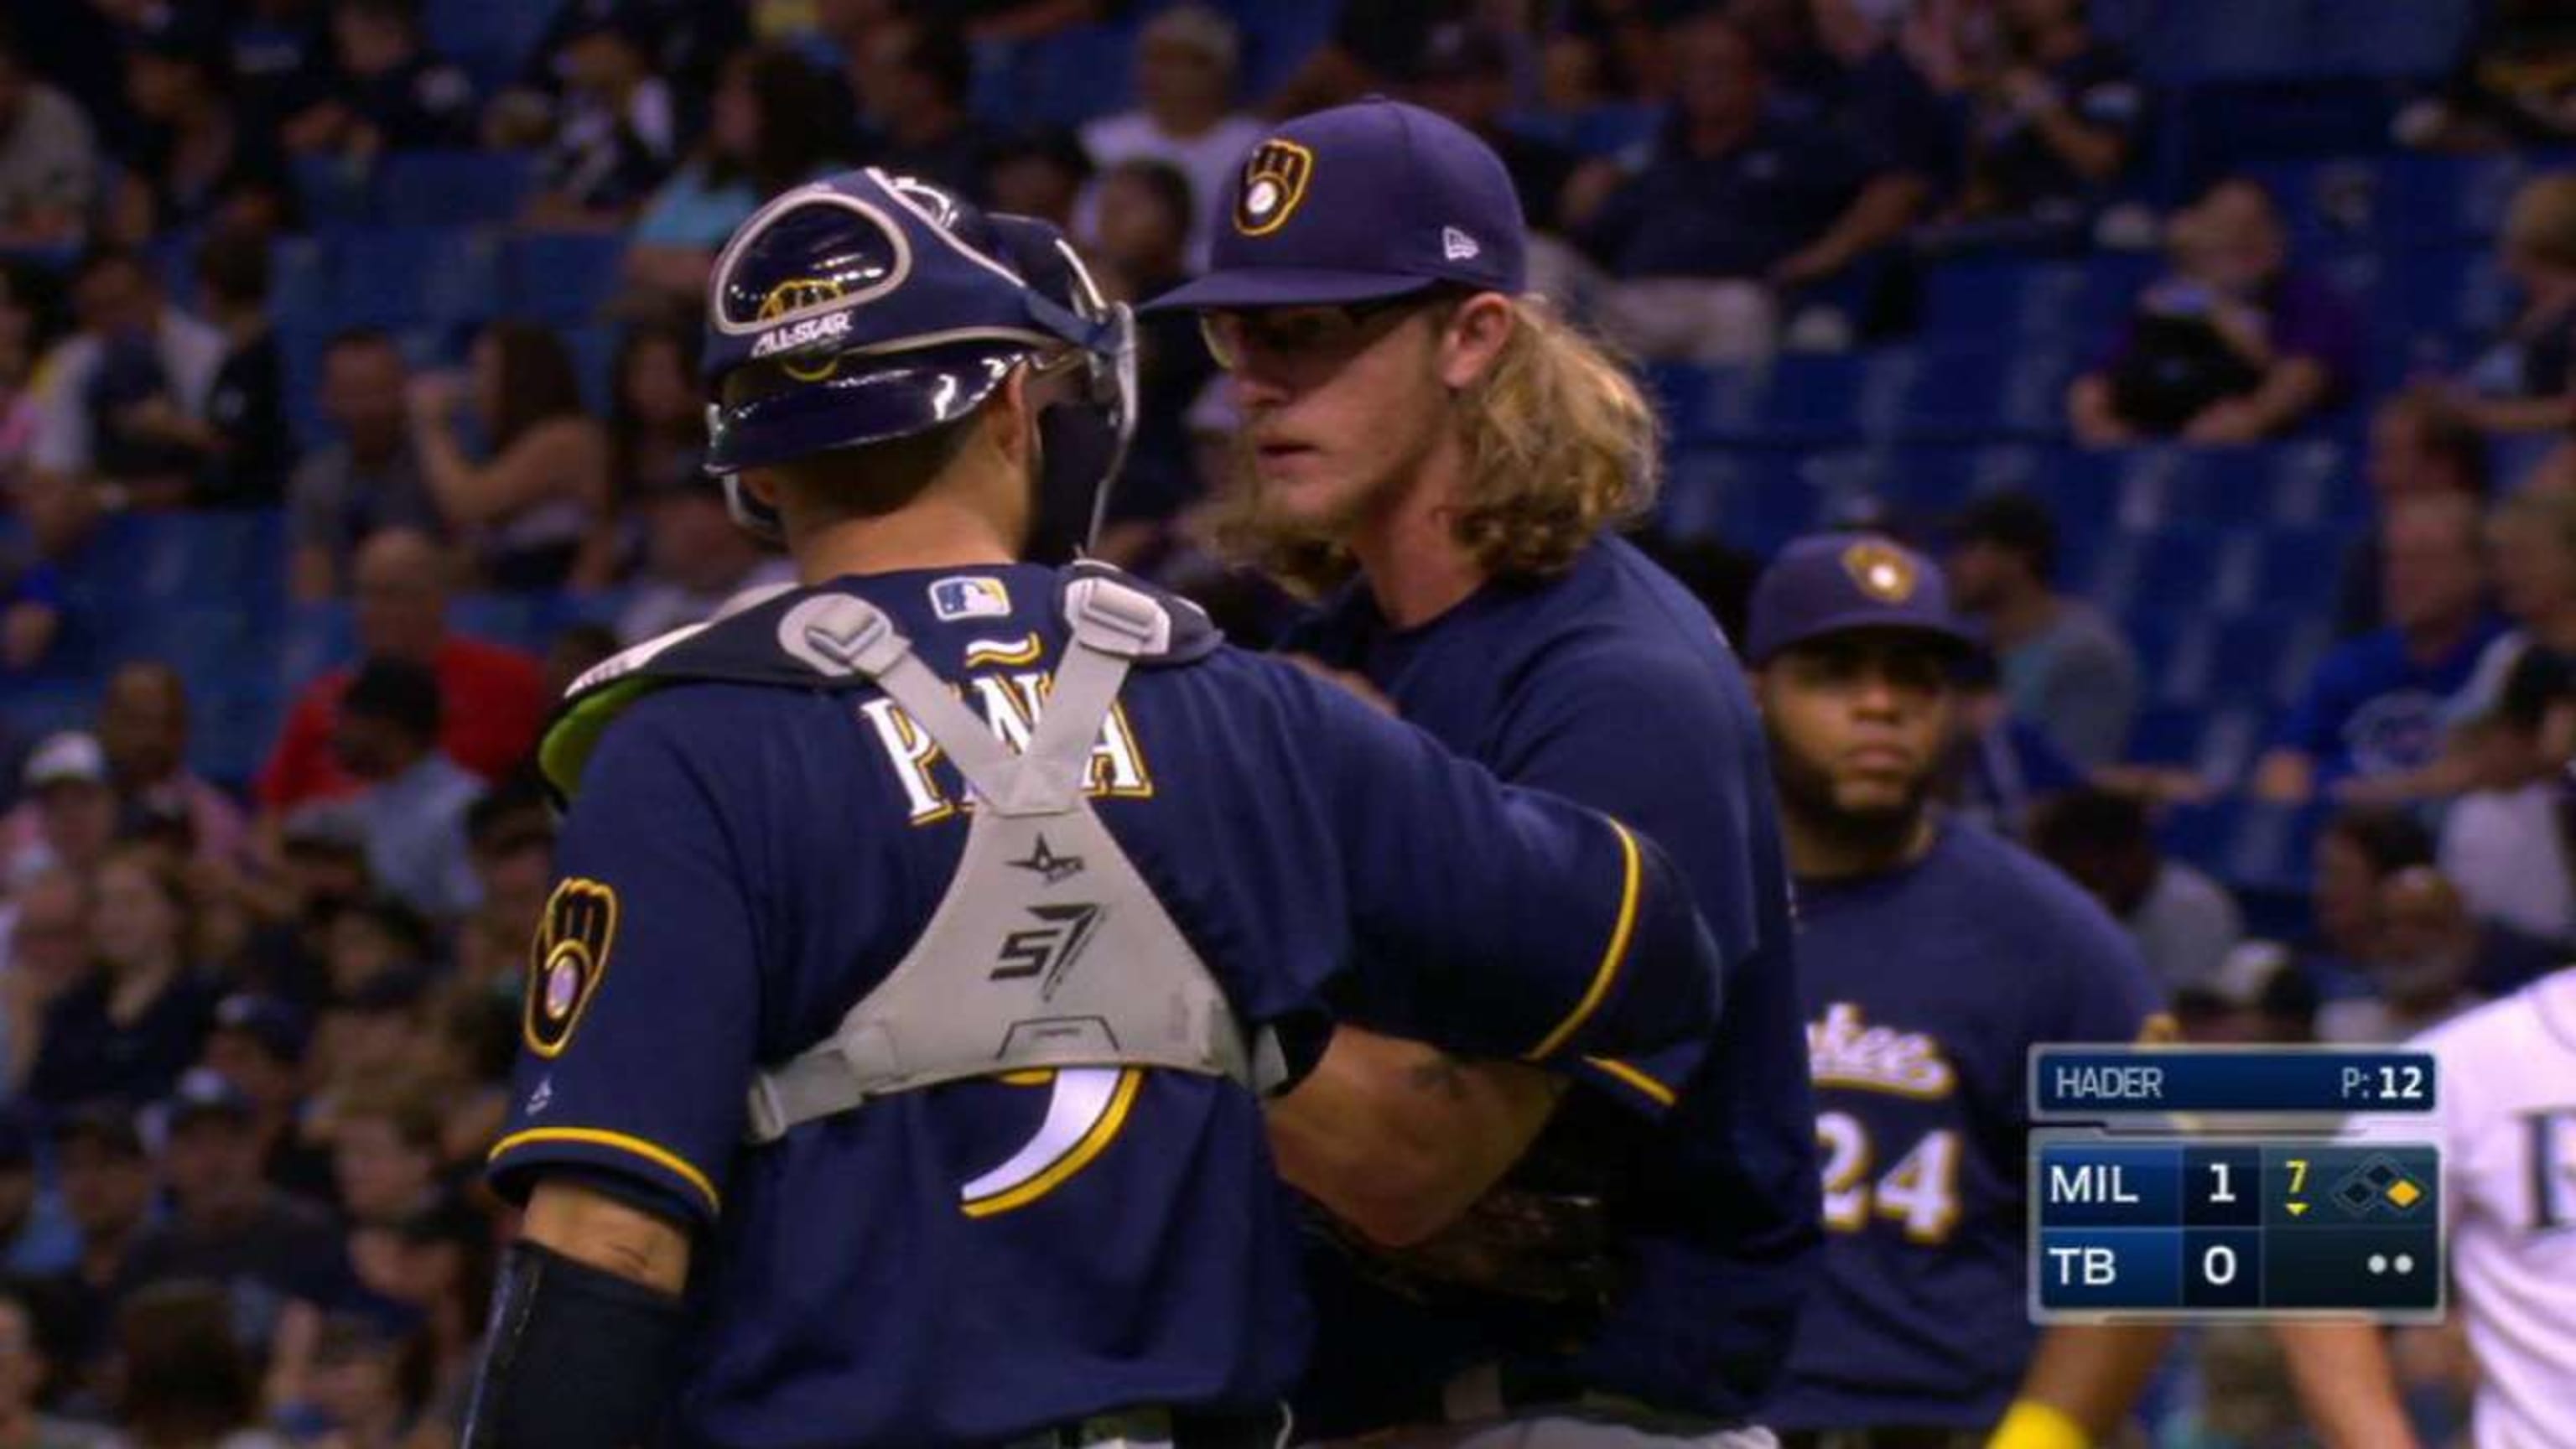 Josh Hader lost his glasses on a pitch, but he still struck out Lucas Duda